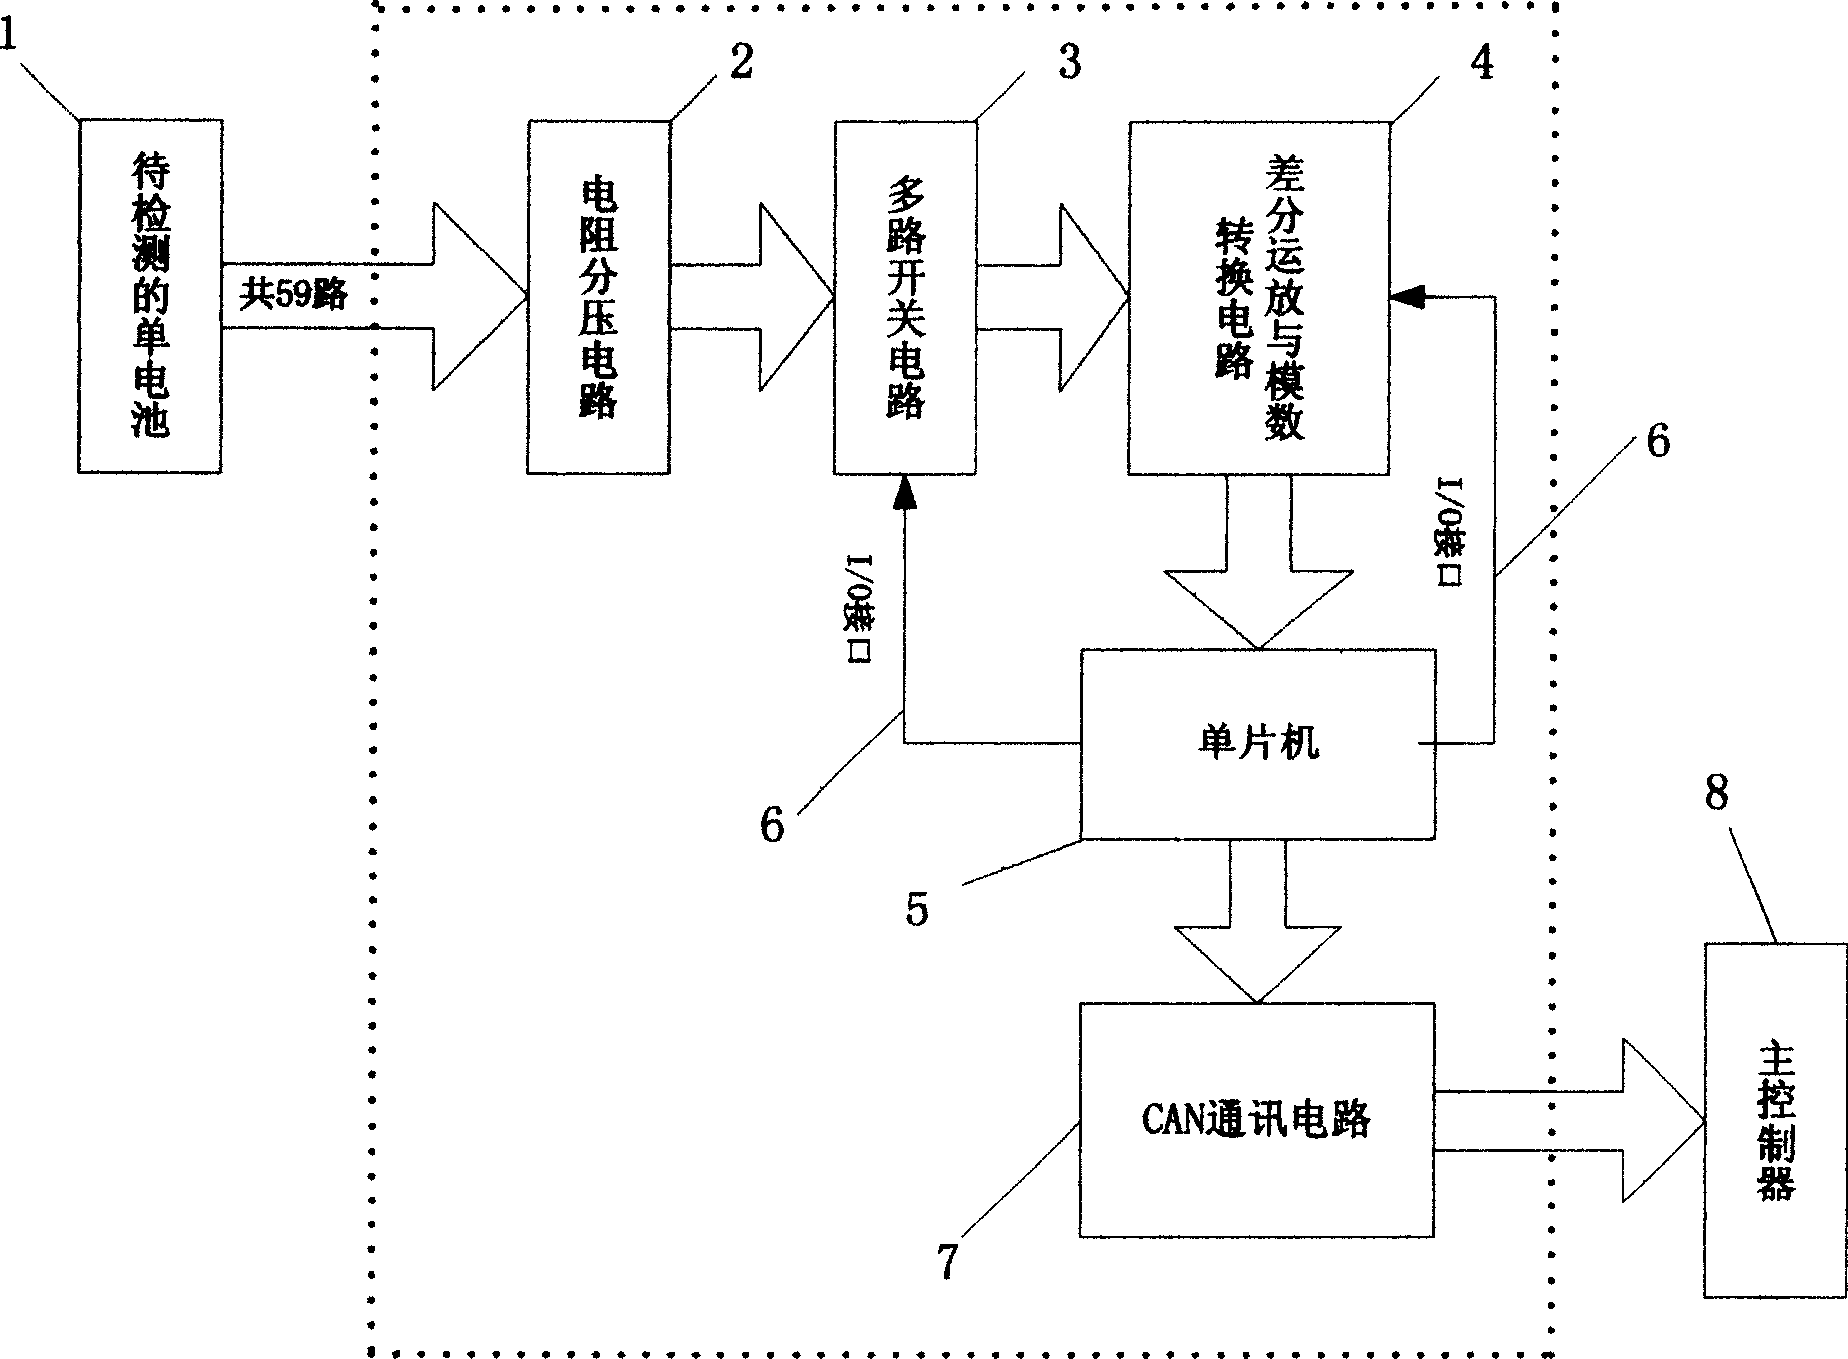 Single chip voltage monitor for vehicle fuel cell stack